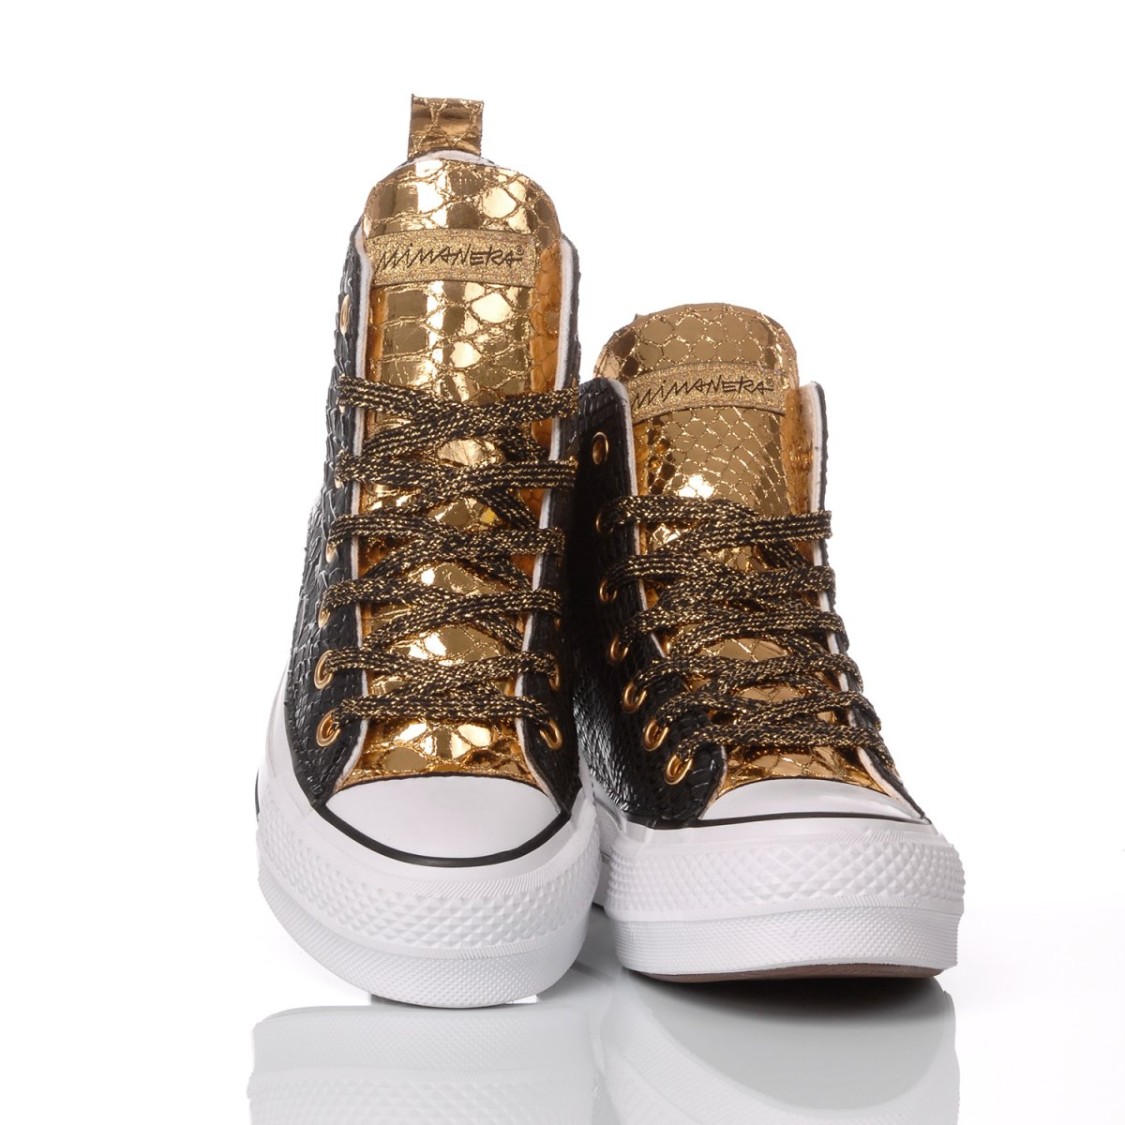 Platform Black, Gold by Converse in Black color for Luxury Clothing | THE